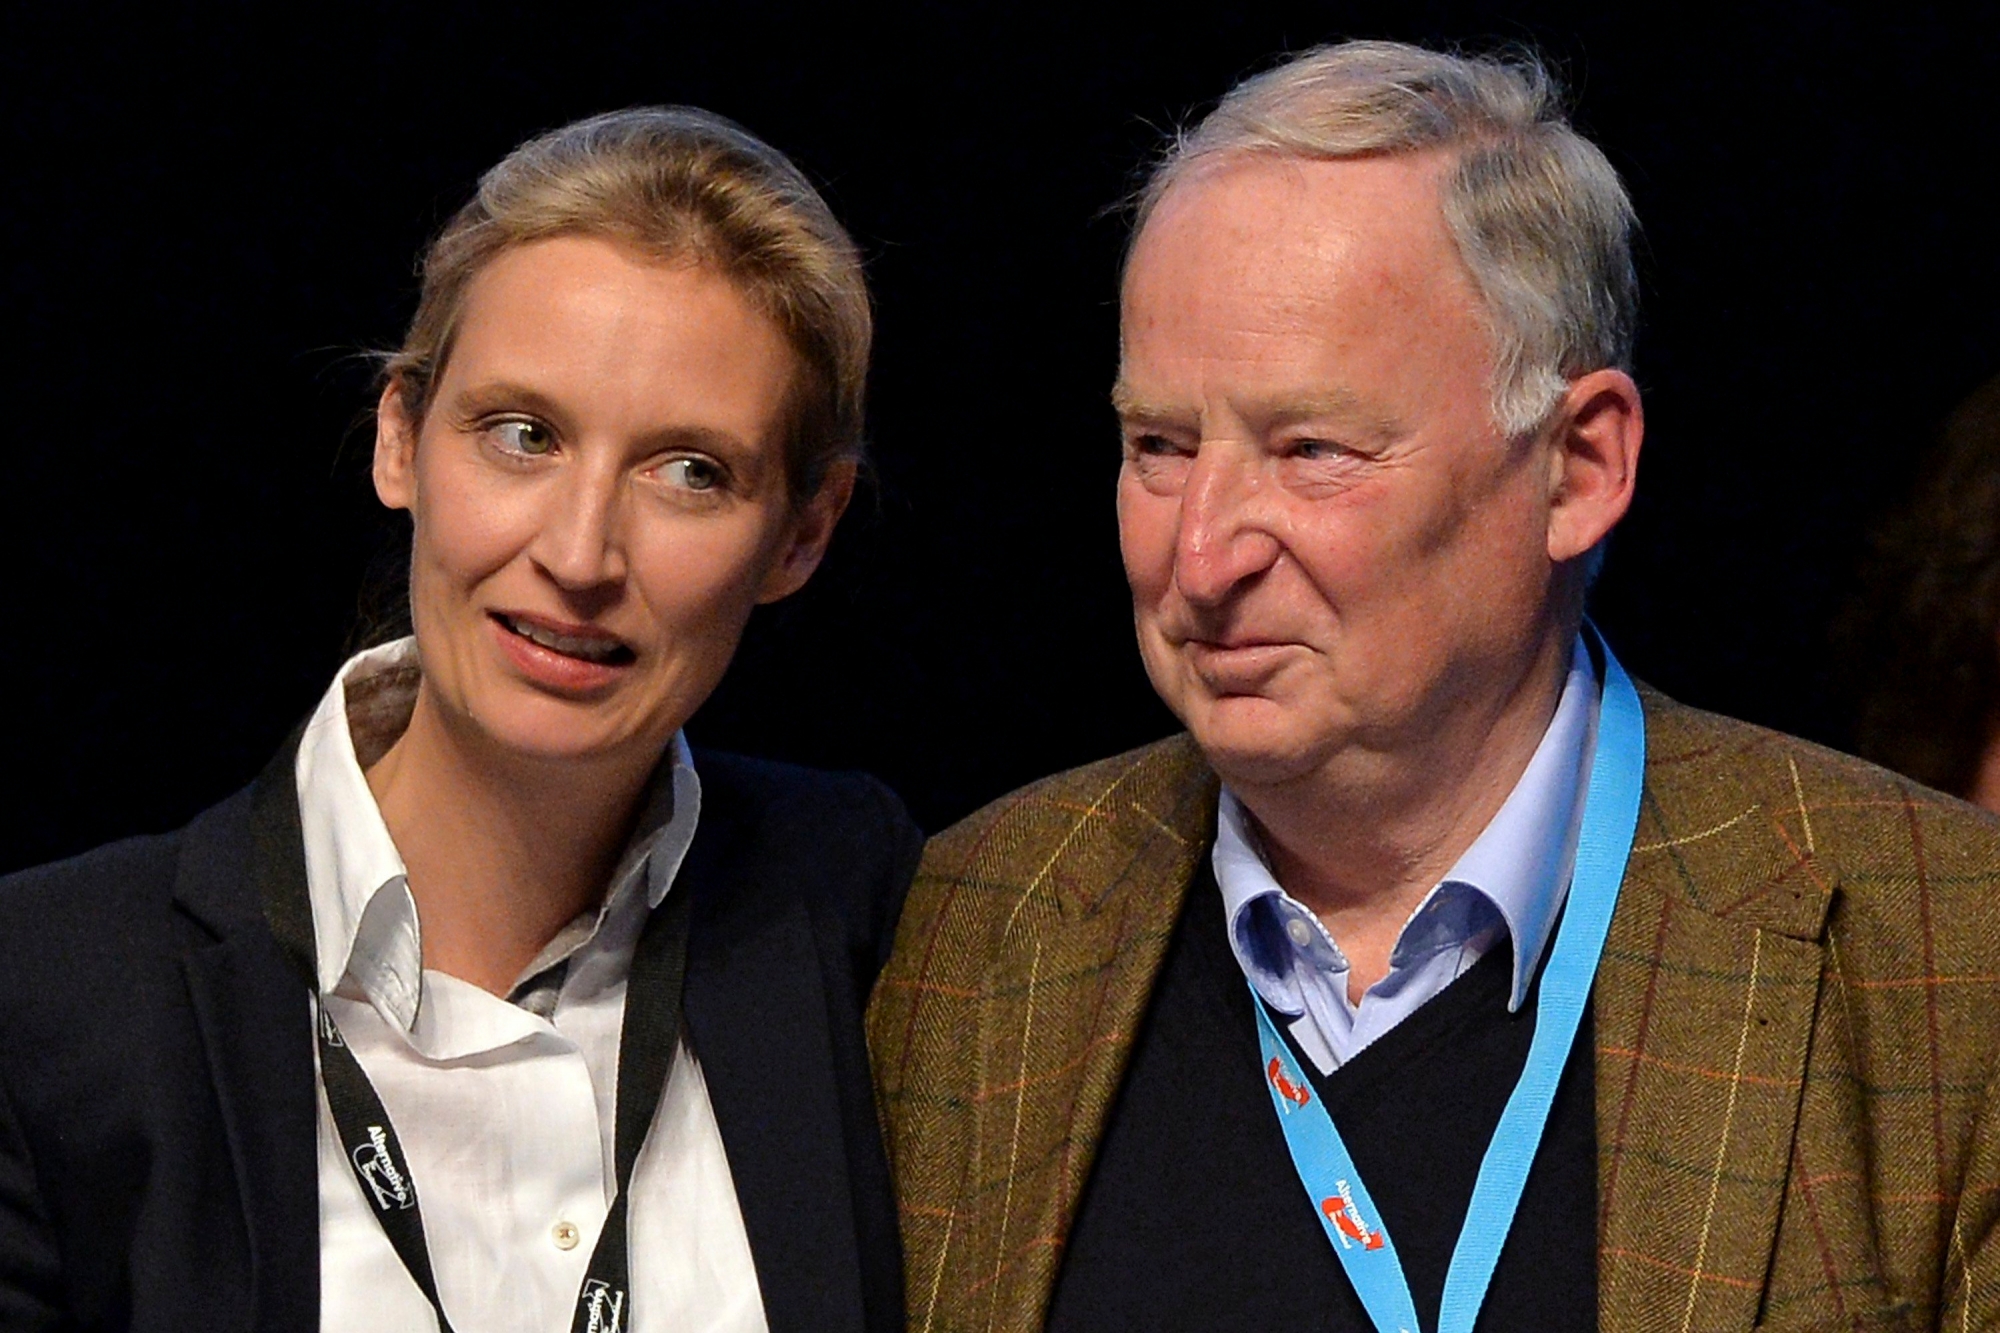 epa05923188 Alice Weidel (L) and Alexander Gauland (R) celebrate their nomination as campaign leaders of Germany's right-wing populist Alternative for Germany (AfD) party for the next German general election during the 'Alternative for Germany' (AfD) party conference in Cologne, Germany, 23 April 2017. The anti-immigration party, which hopes to win its first seats in the national parliament in a general election in September, will gather in Cologne on 22 and 23 April 2017.  EPA/SASCHA STEINBACH GERMANY PARTIES